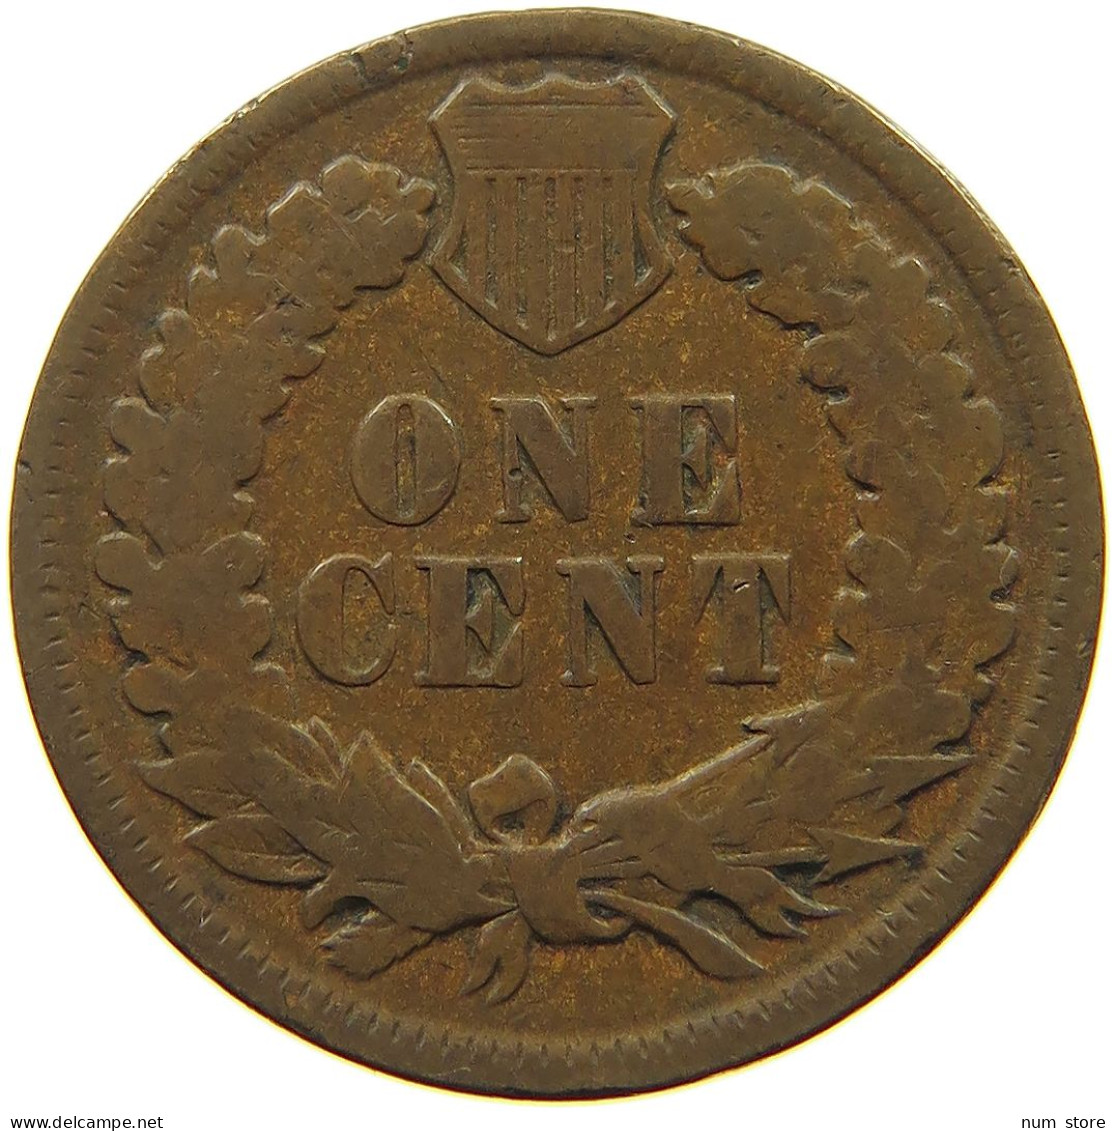 UNITED STATES OF AMERICA CENT 1895 INDIAN HEAD #a094 0307 - 1859-1909: Indian Head